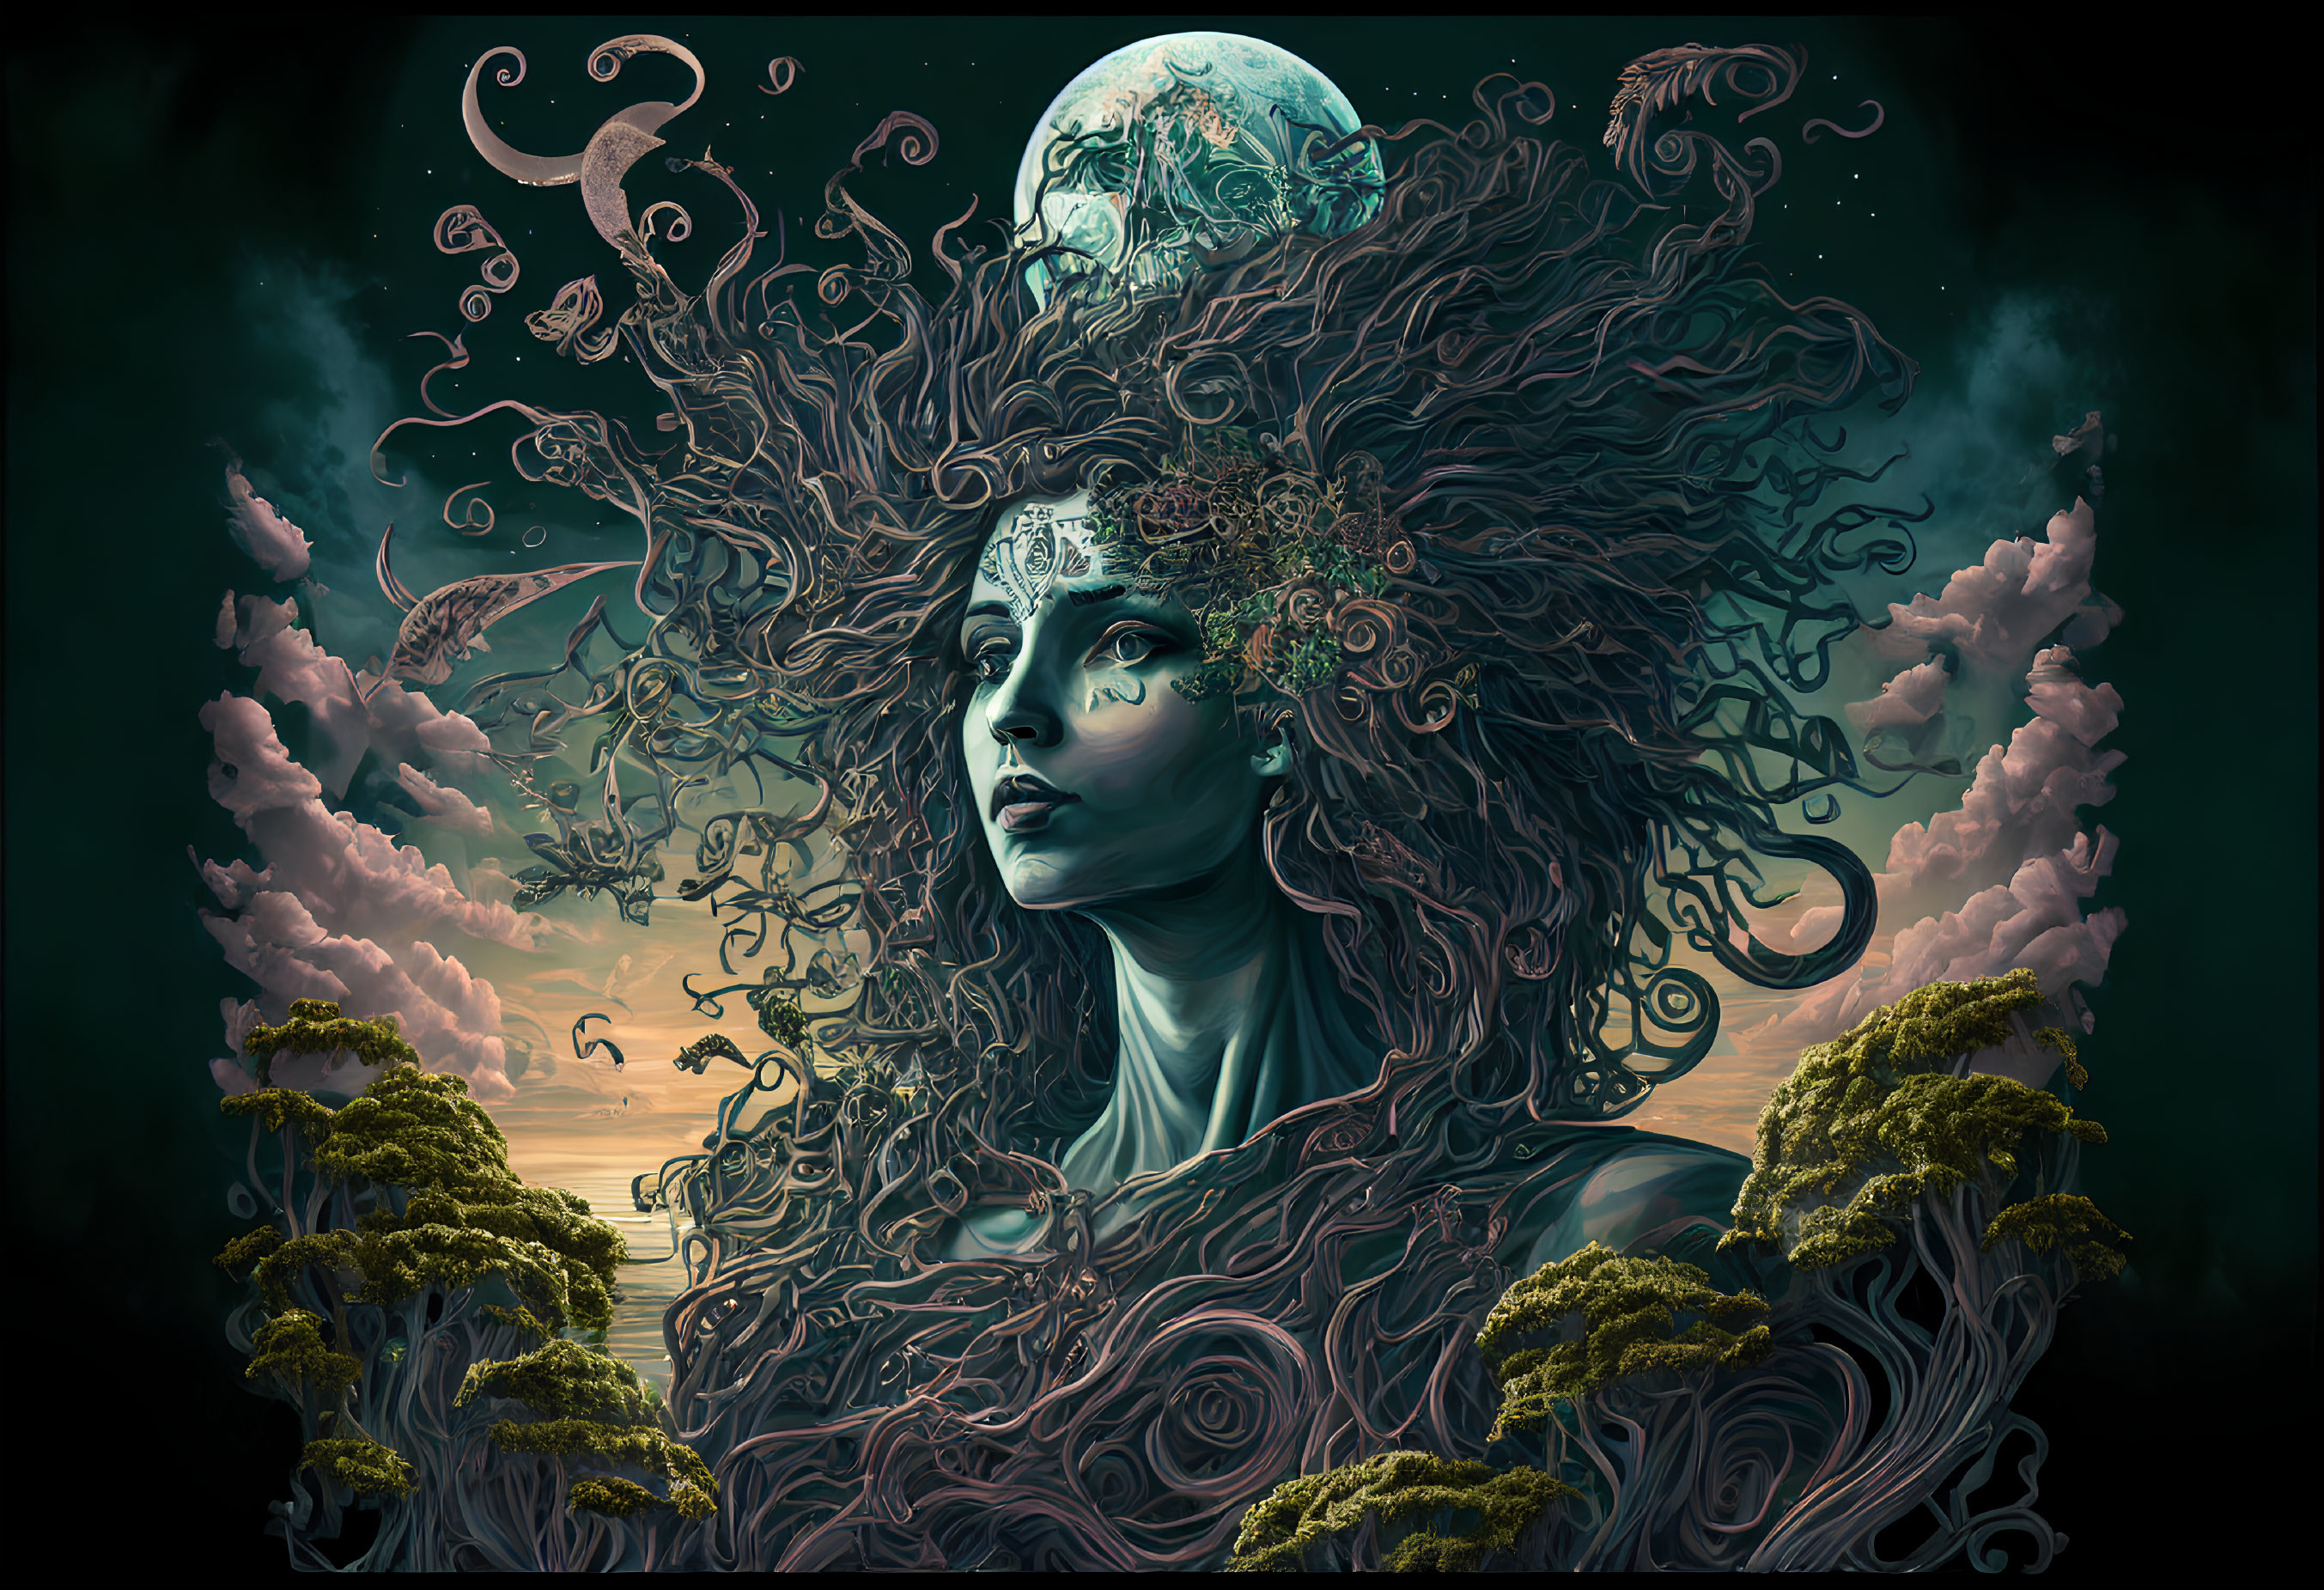 Surreal portrait of woman merging with night sky and tentacles